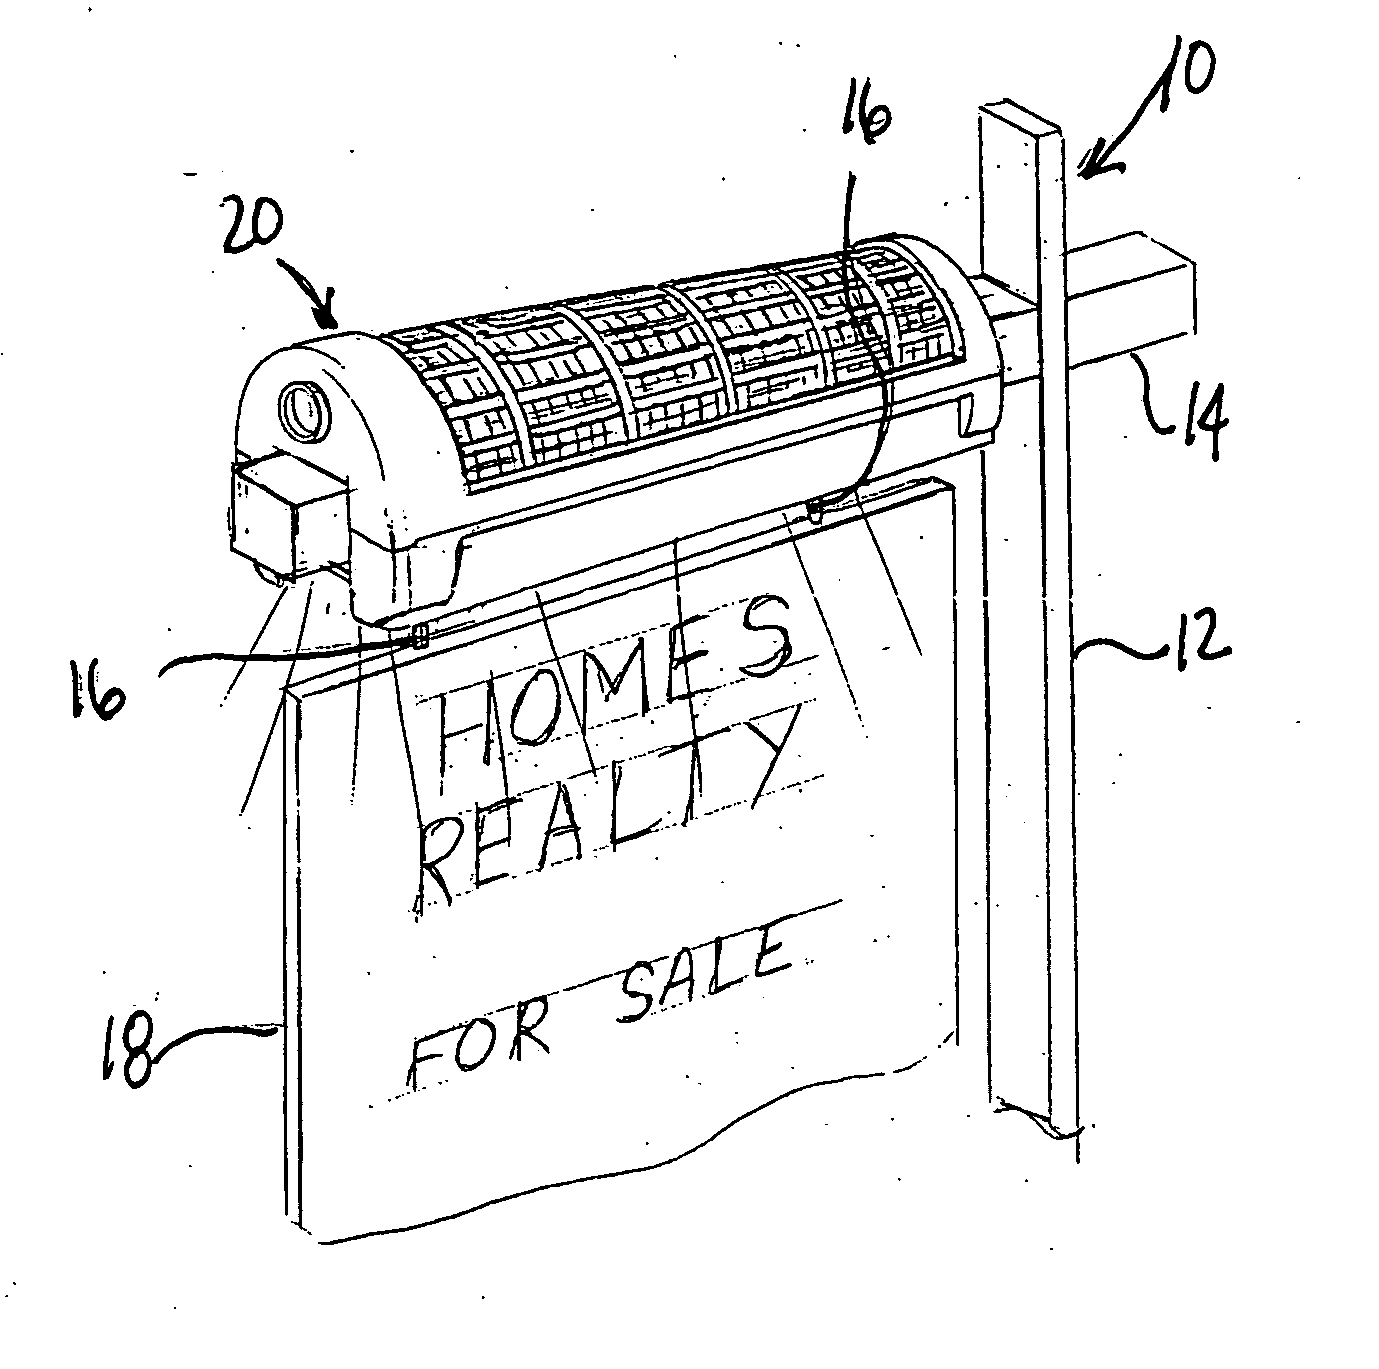 Lighting device for a realty sign